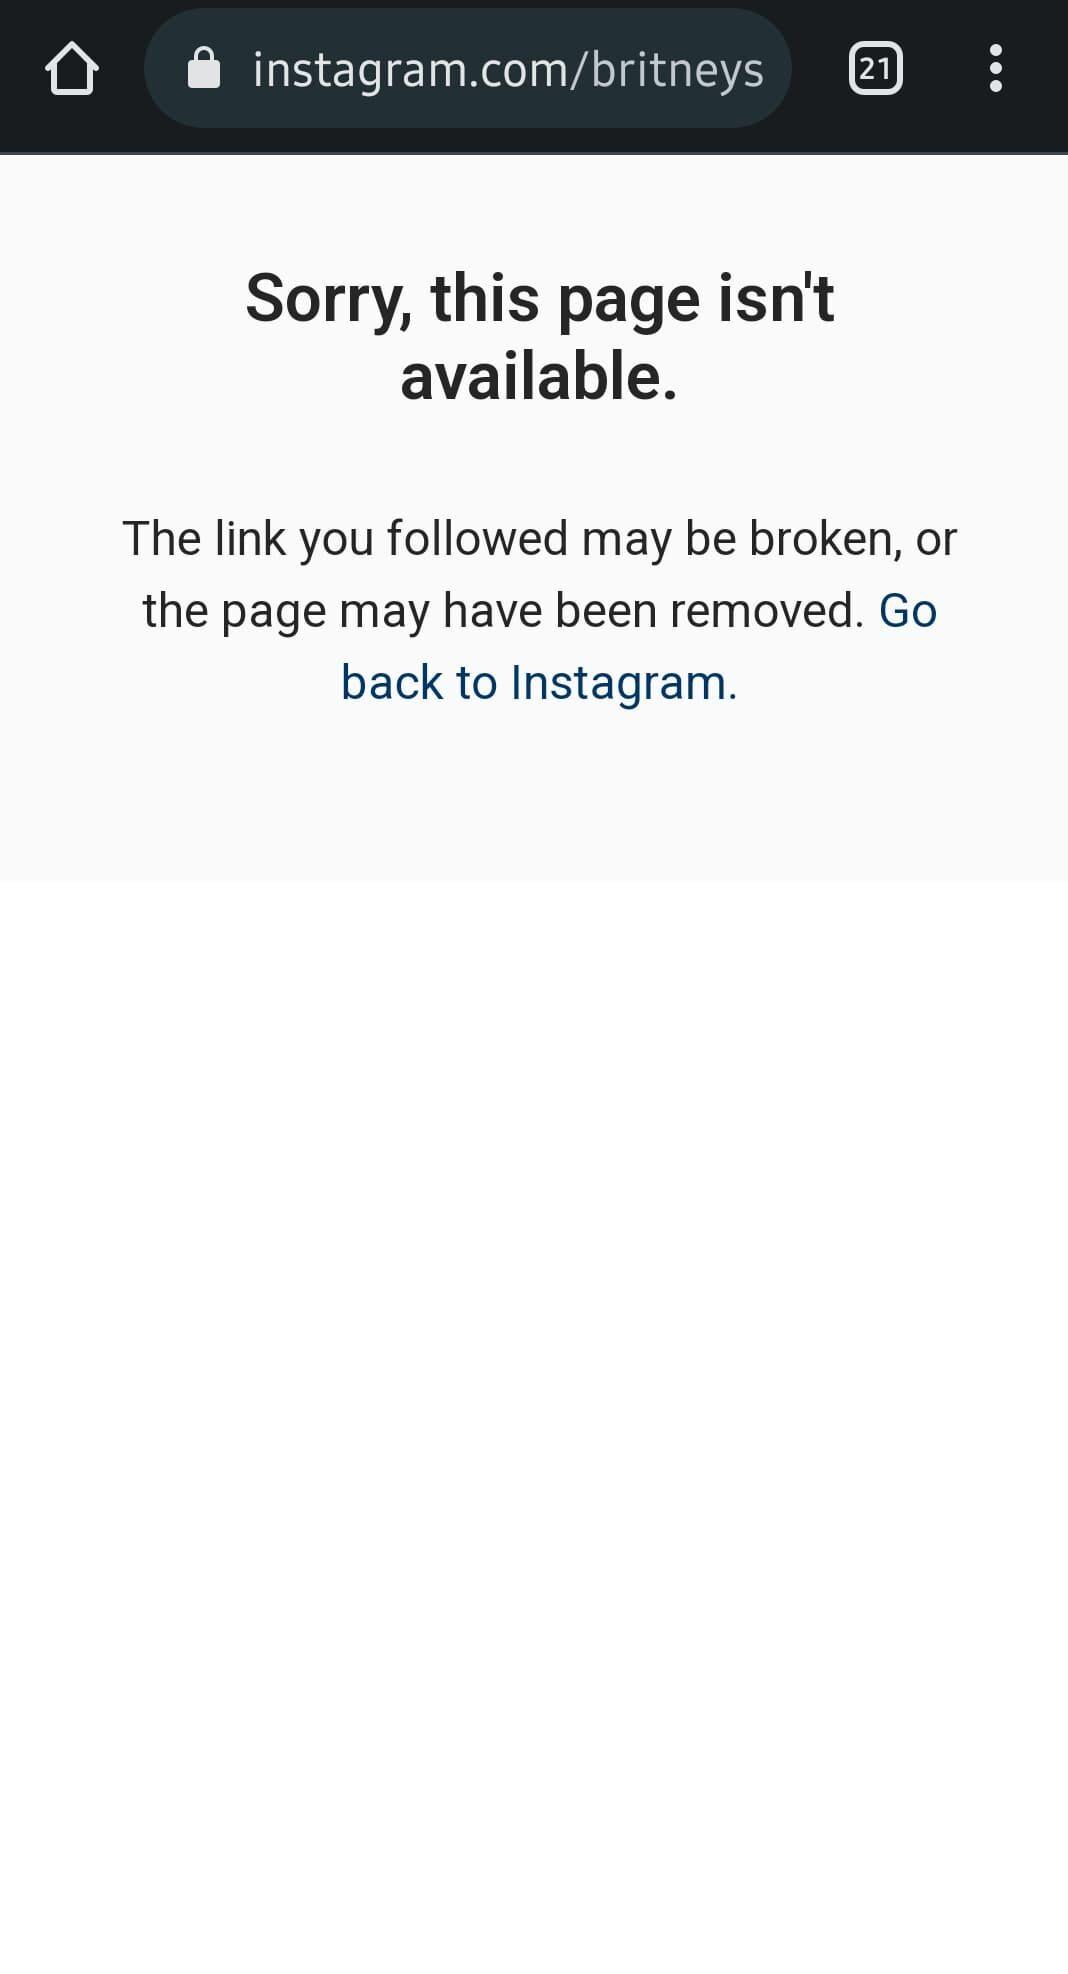 Britney Spears deleted her Instagram account on June 16, 2022